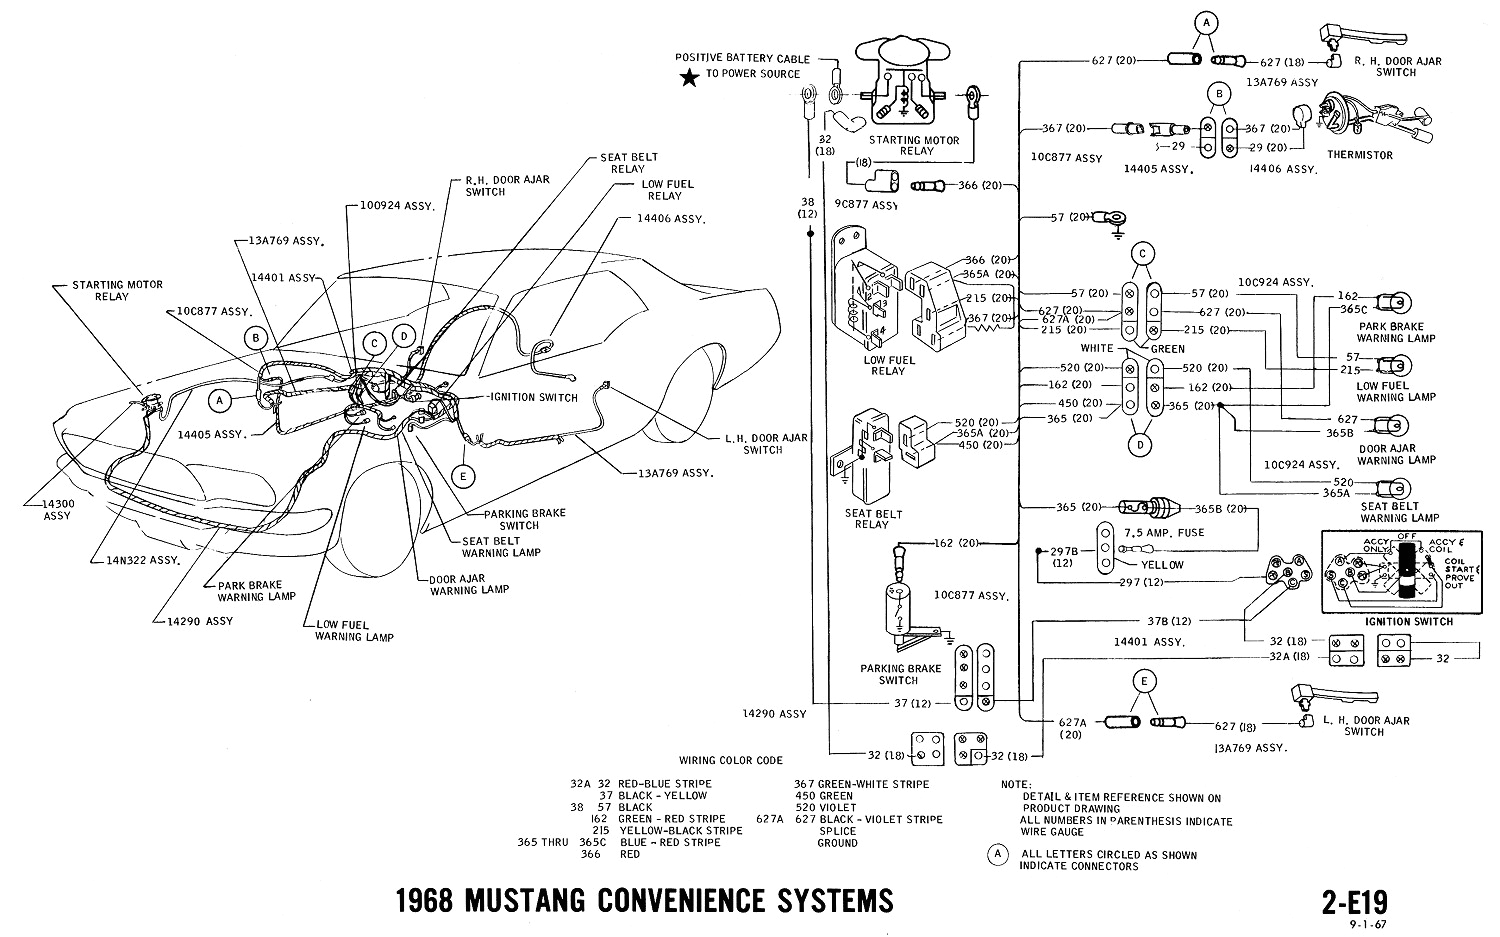 1968 mustang wiring diagrams and vacuum schematics average joe 1968 mustang and ford vacuum diagrams